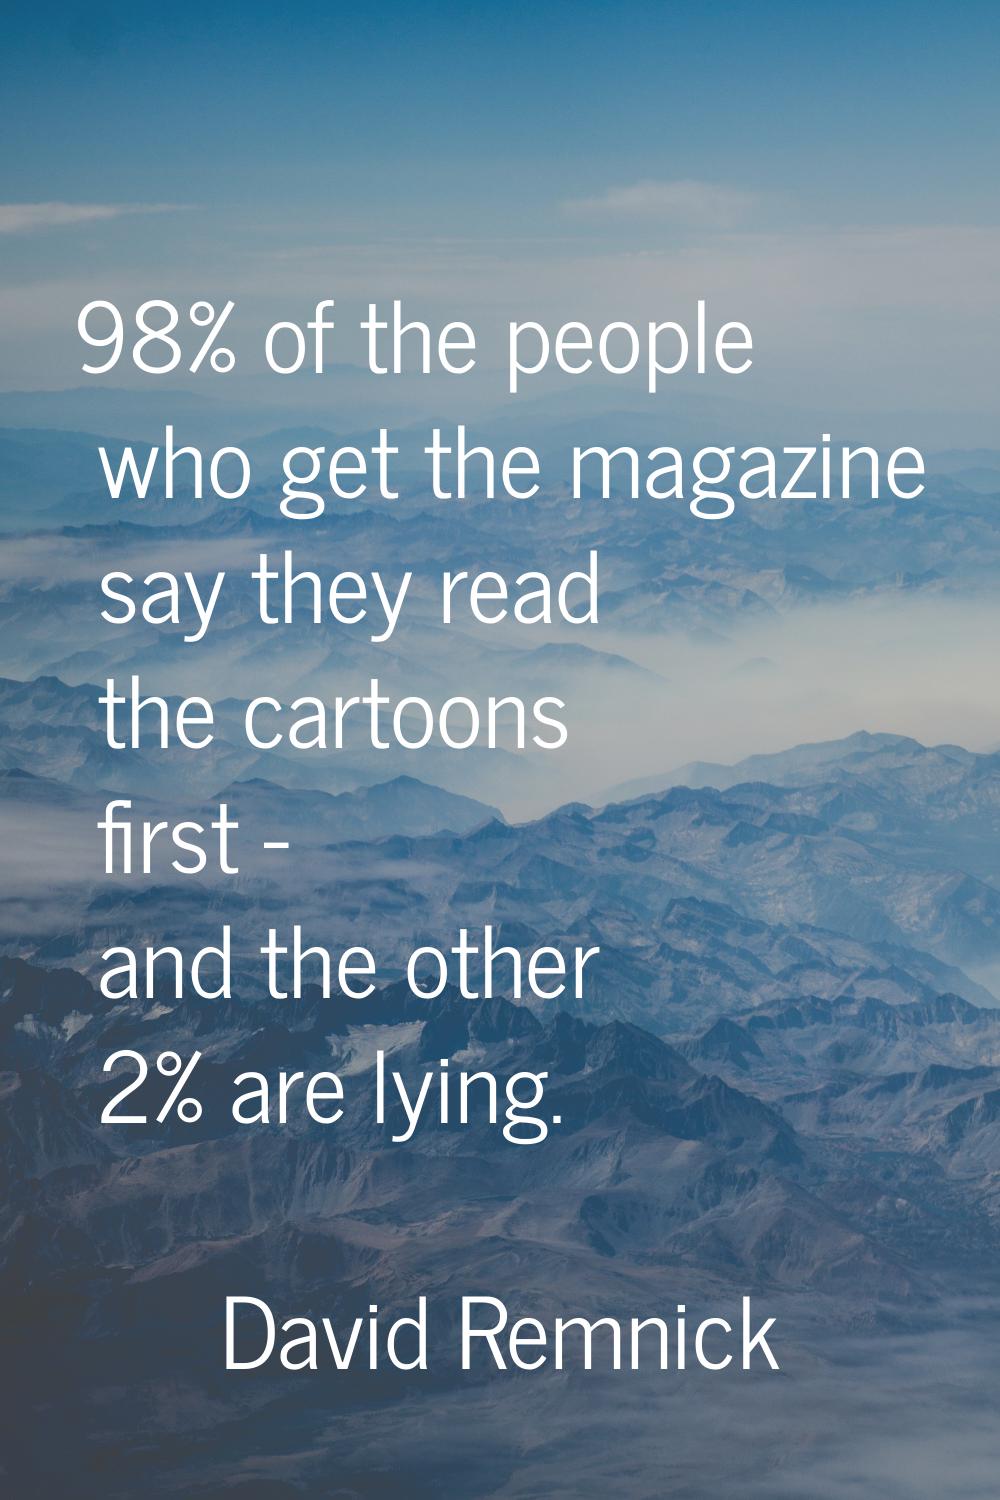 98% of the people who get the magazine say they read the cartoons first - and the other 2% are lyin